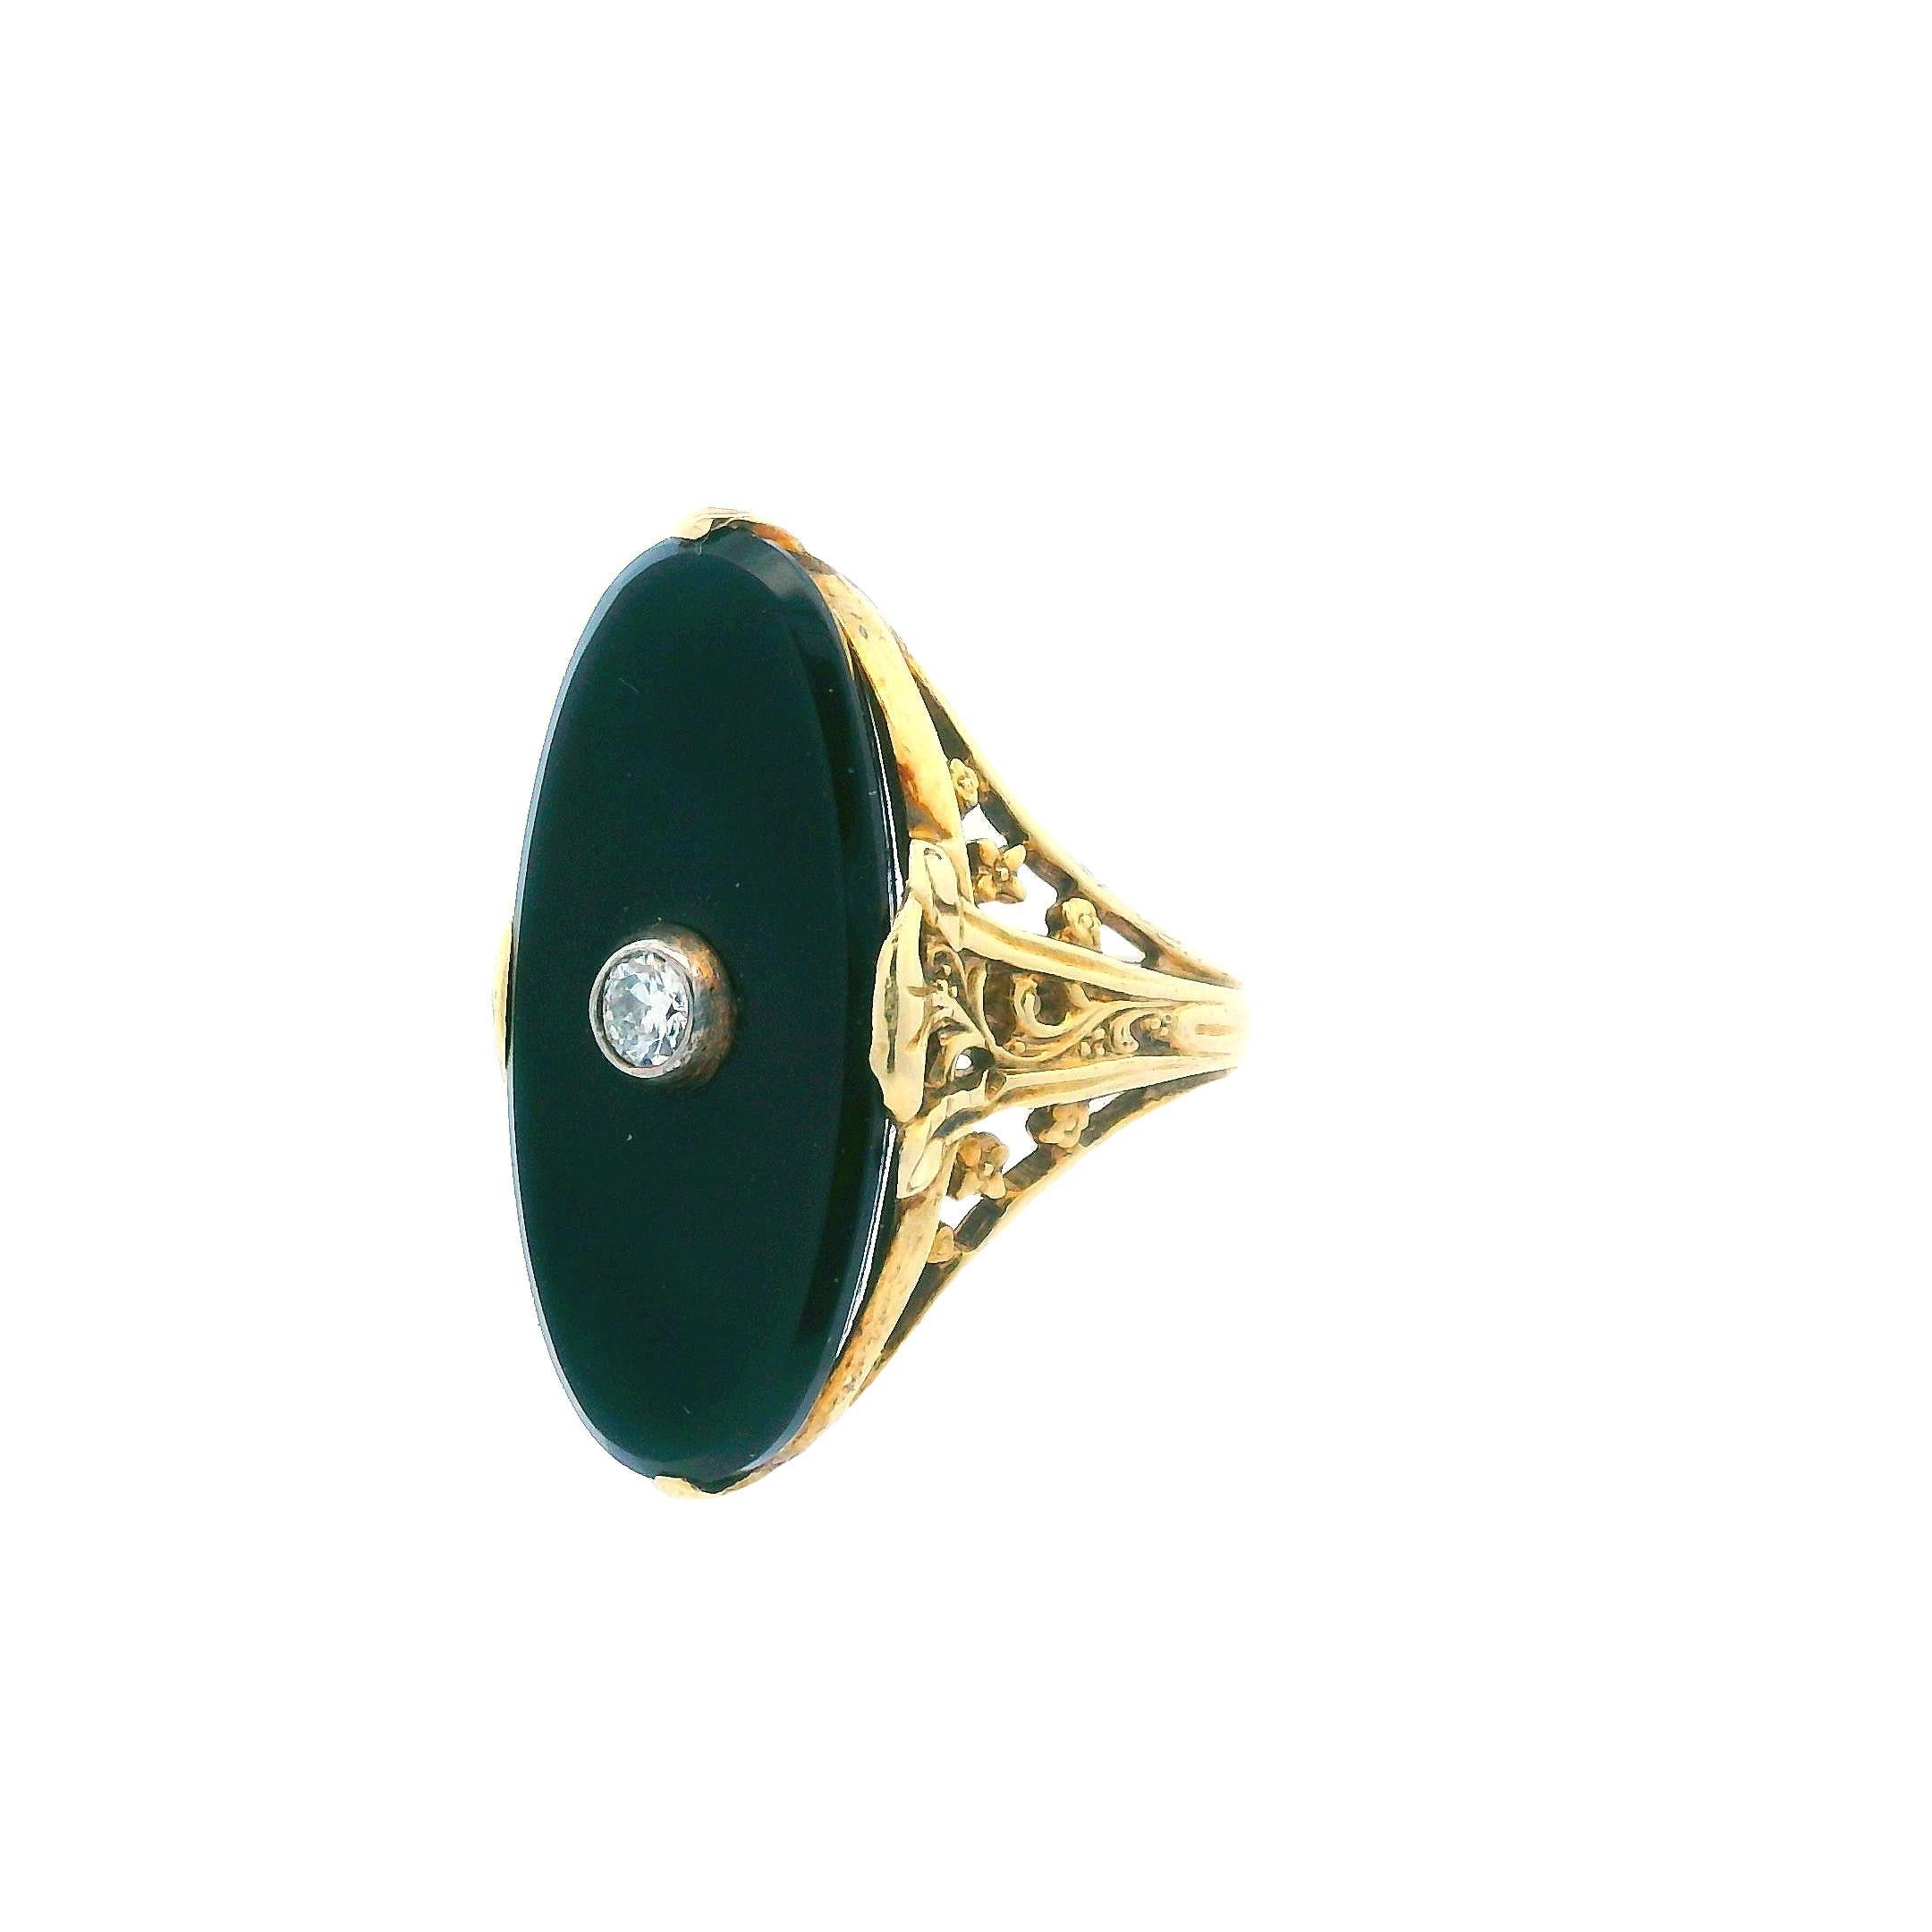 Art Deco 14K Yellow Gold Onyx & Diamond Ring In Good Condition For Sale In Lexington, KY